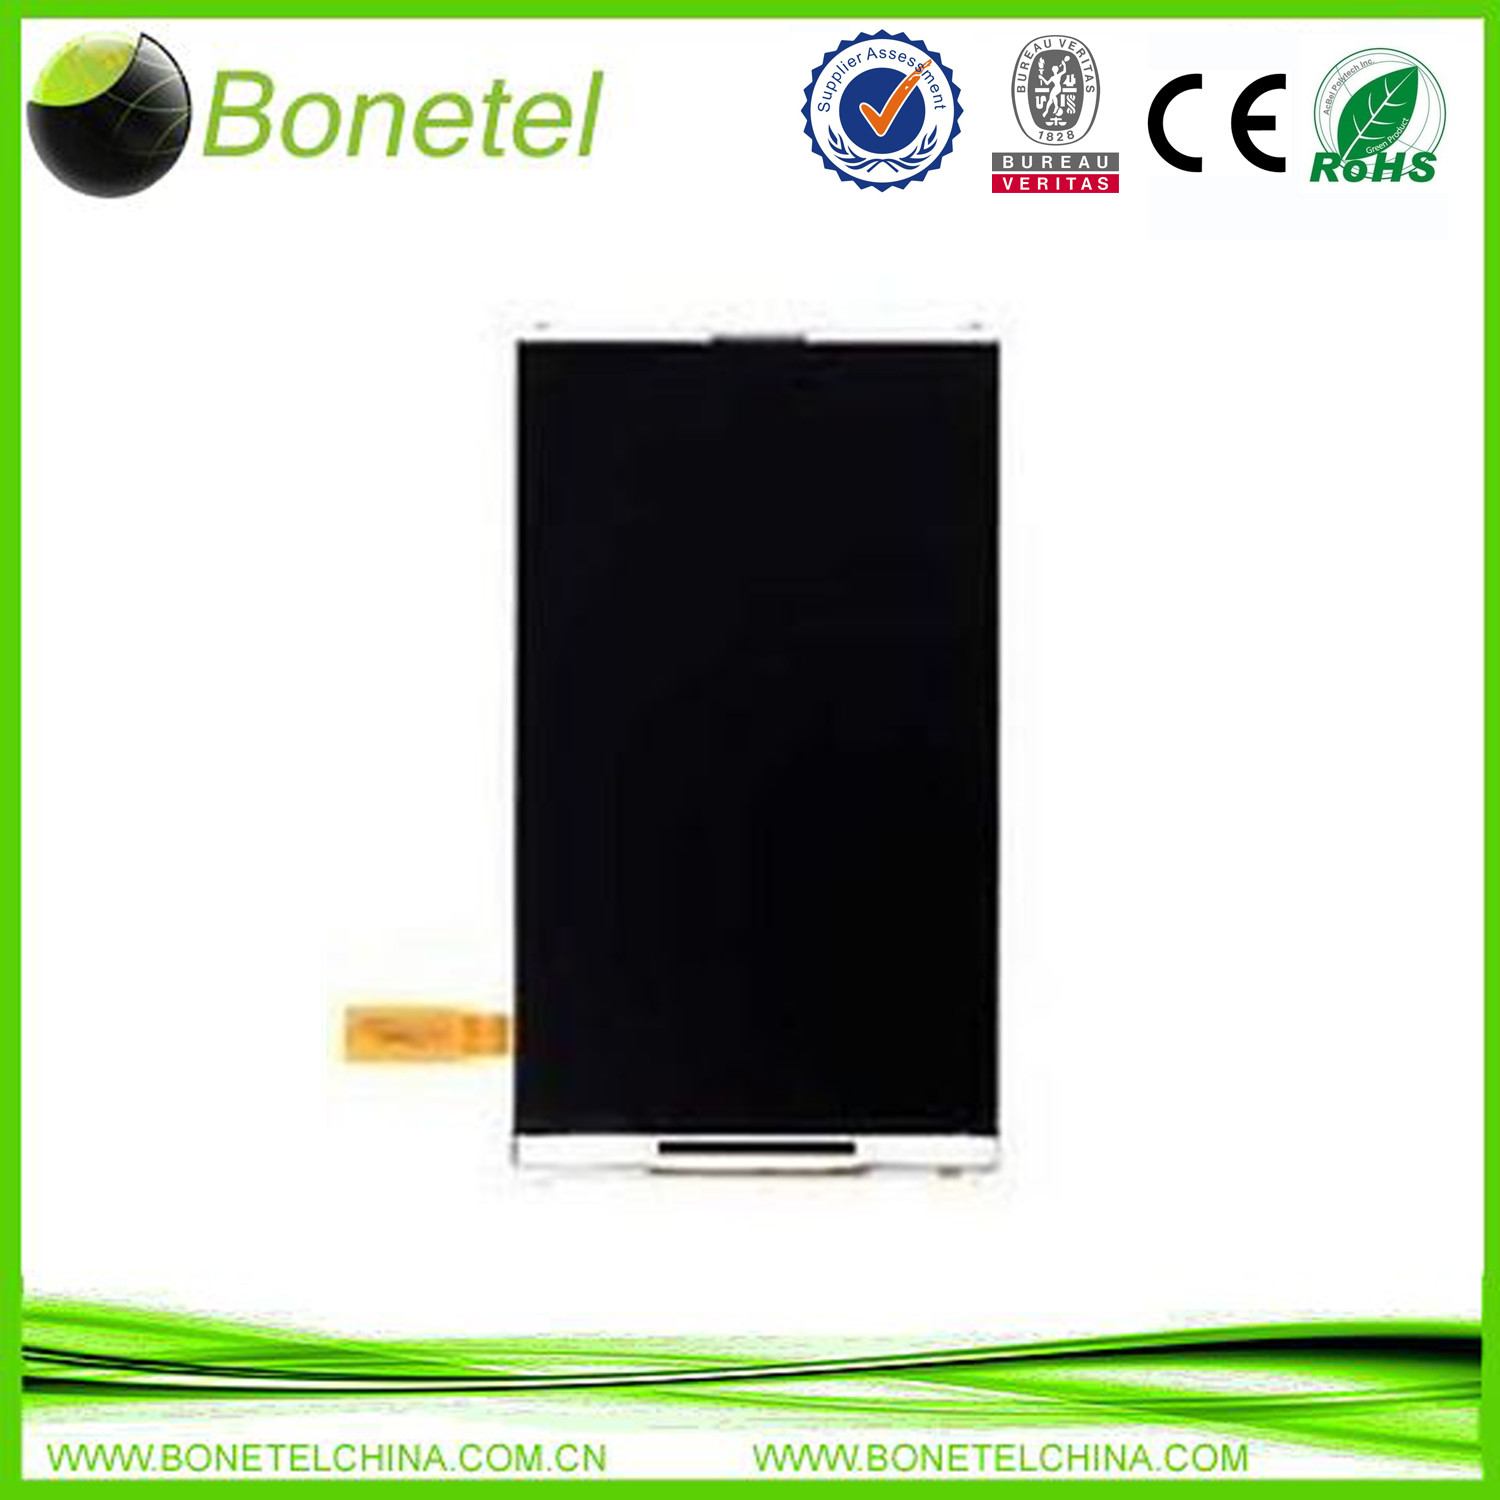 Genuine Original Samsung LCD Display Replacement For -Wave 525 GT-S5250